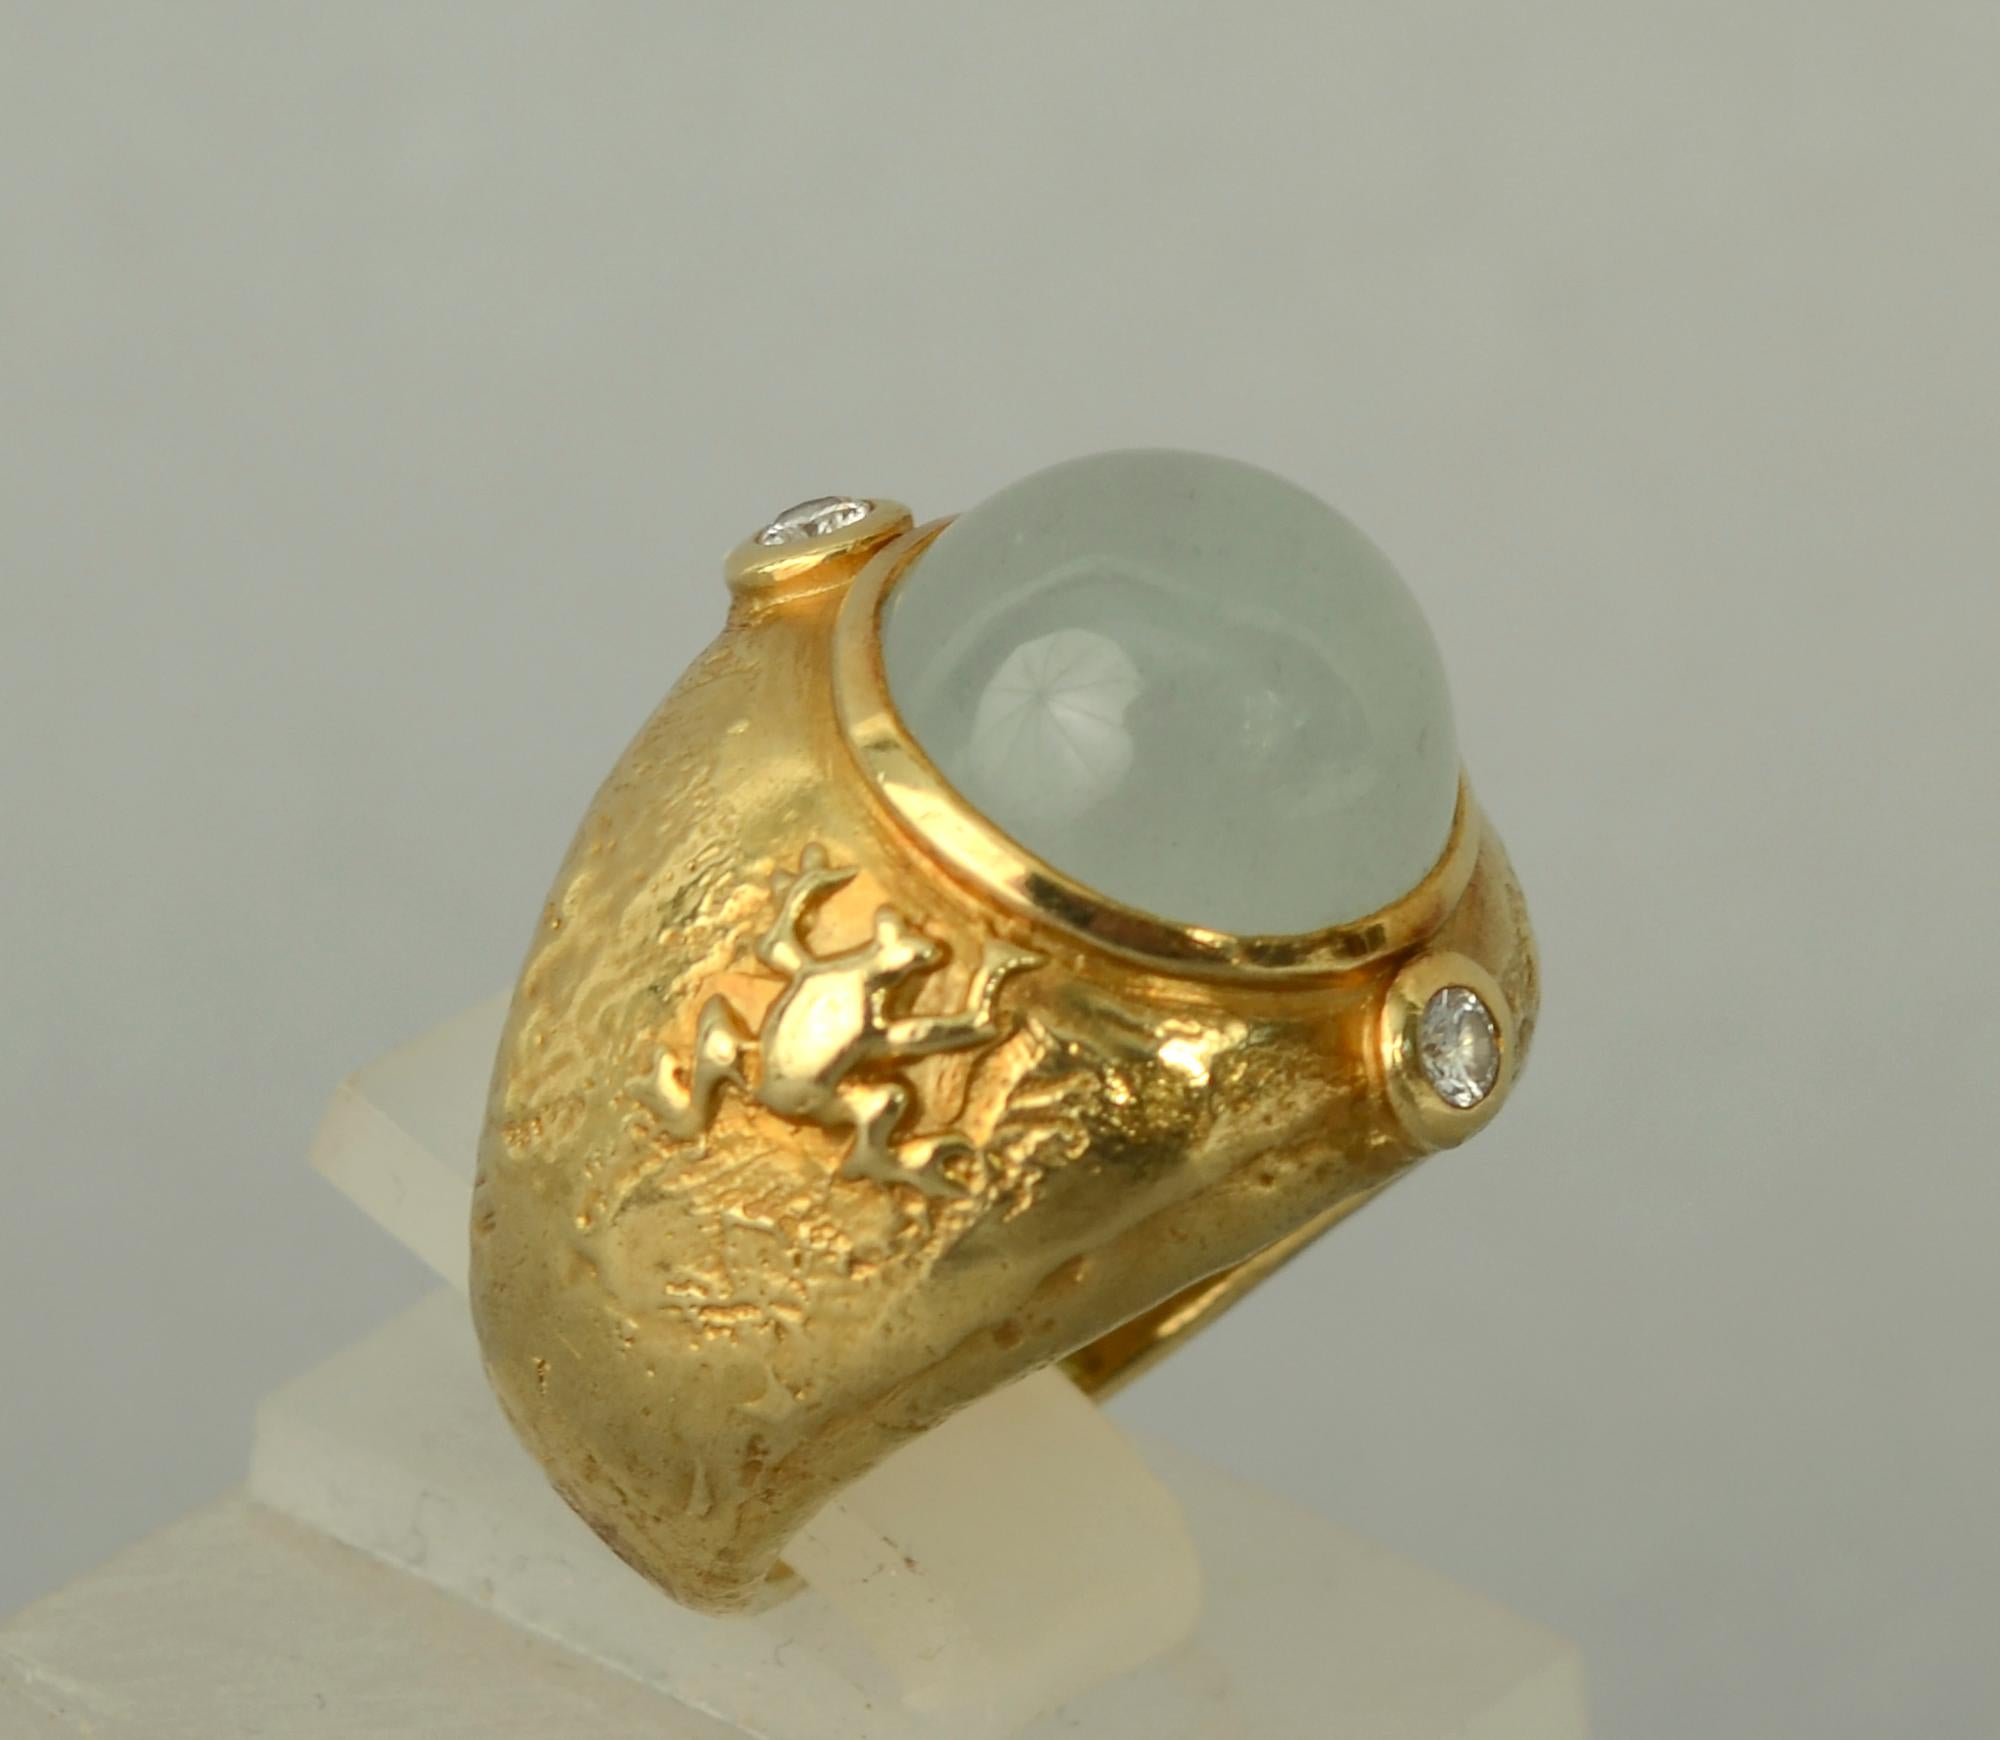 Whimsical and unusual 18 karat gold ring by Seidengang. The ring has an unexpected gold frog on one side and a turtle on the other. The central cabochon aquamarine has a diamond on either side. The gold has a nice molten texture. The ring is size 5